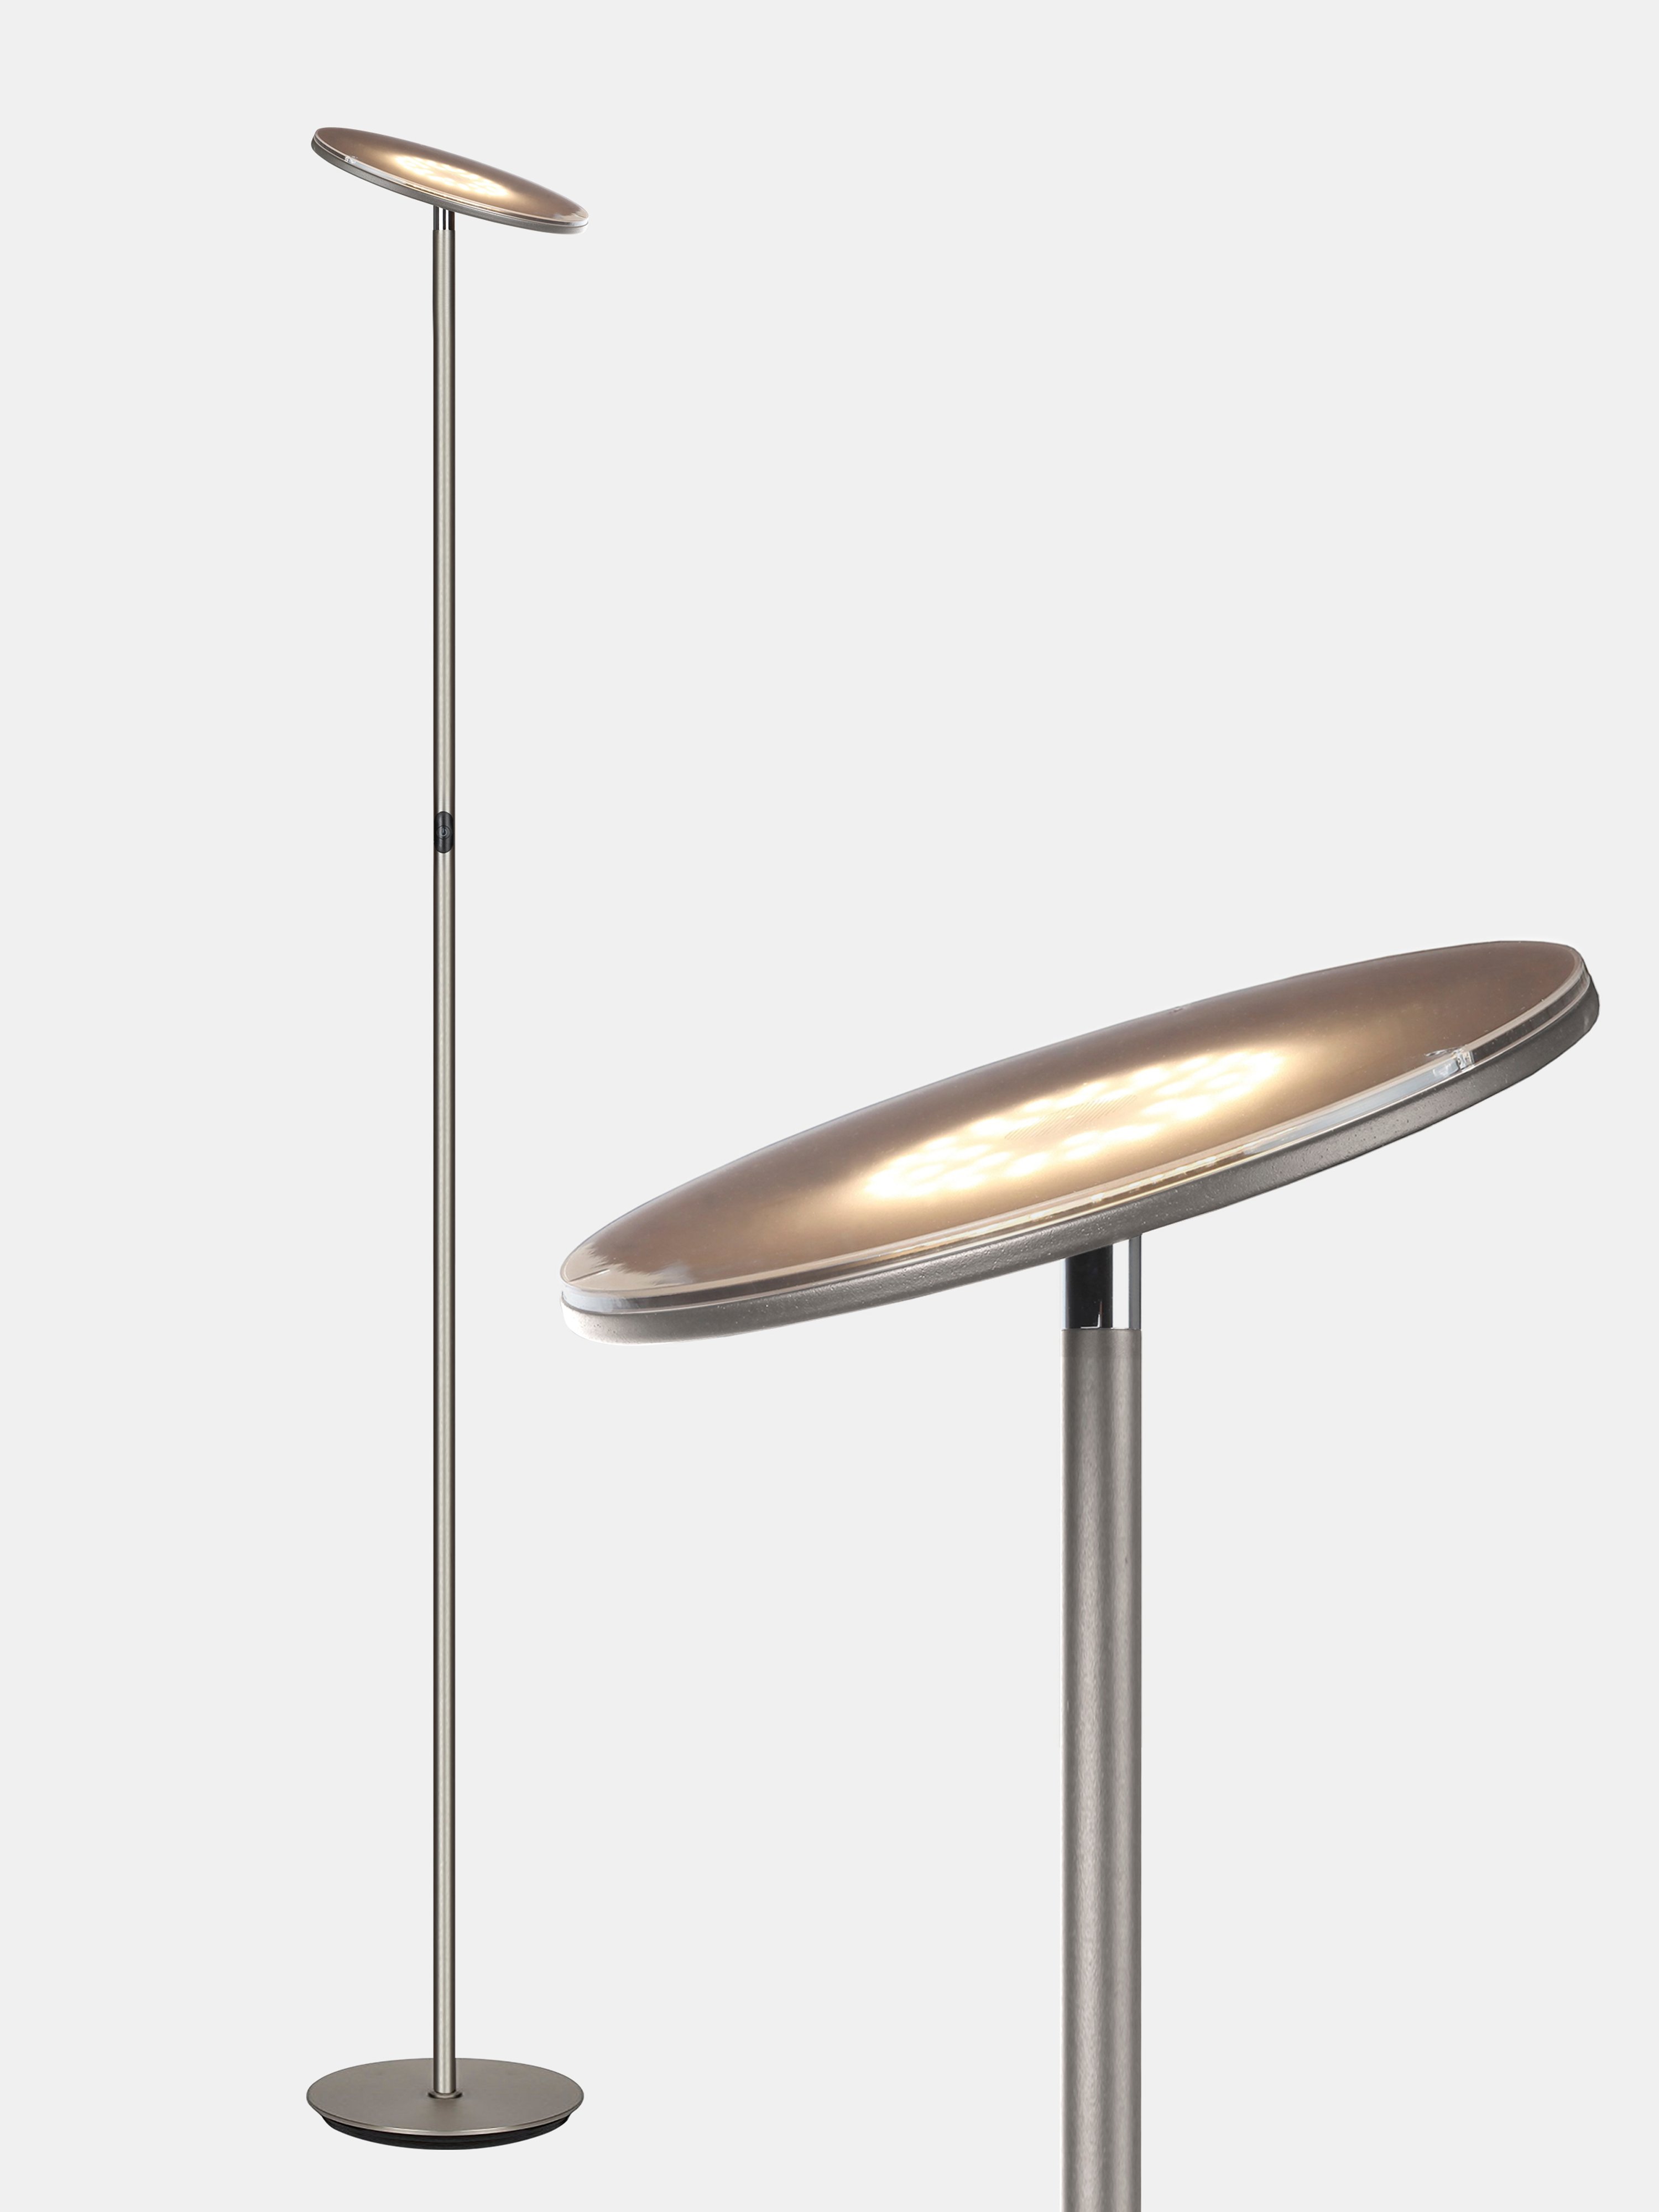 BRIGHTECH BRIGHTECH SKY LED TORCHIERE FLOOR LAMP